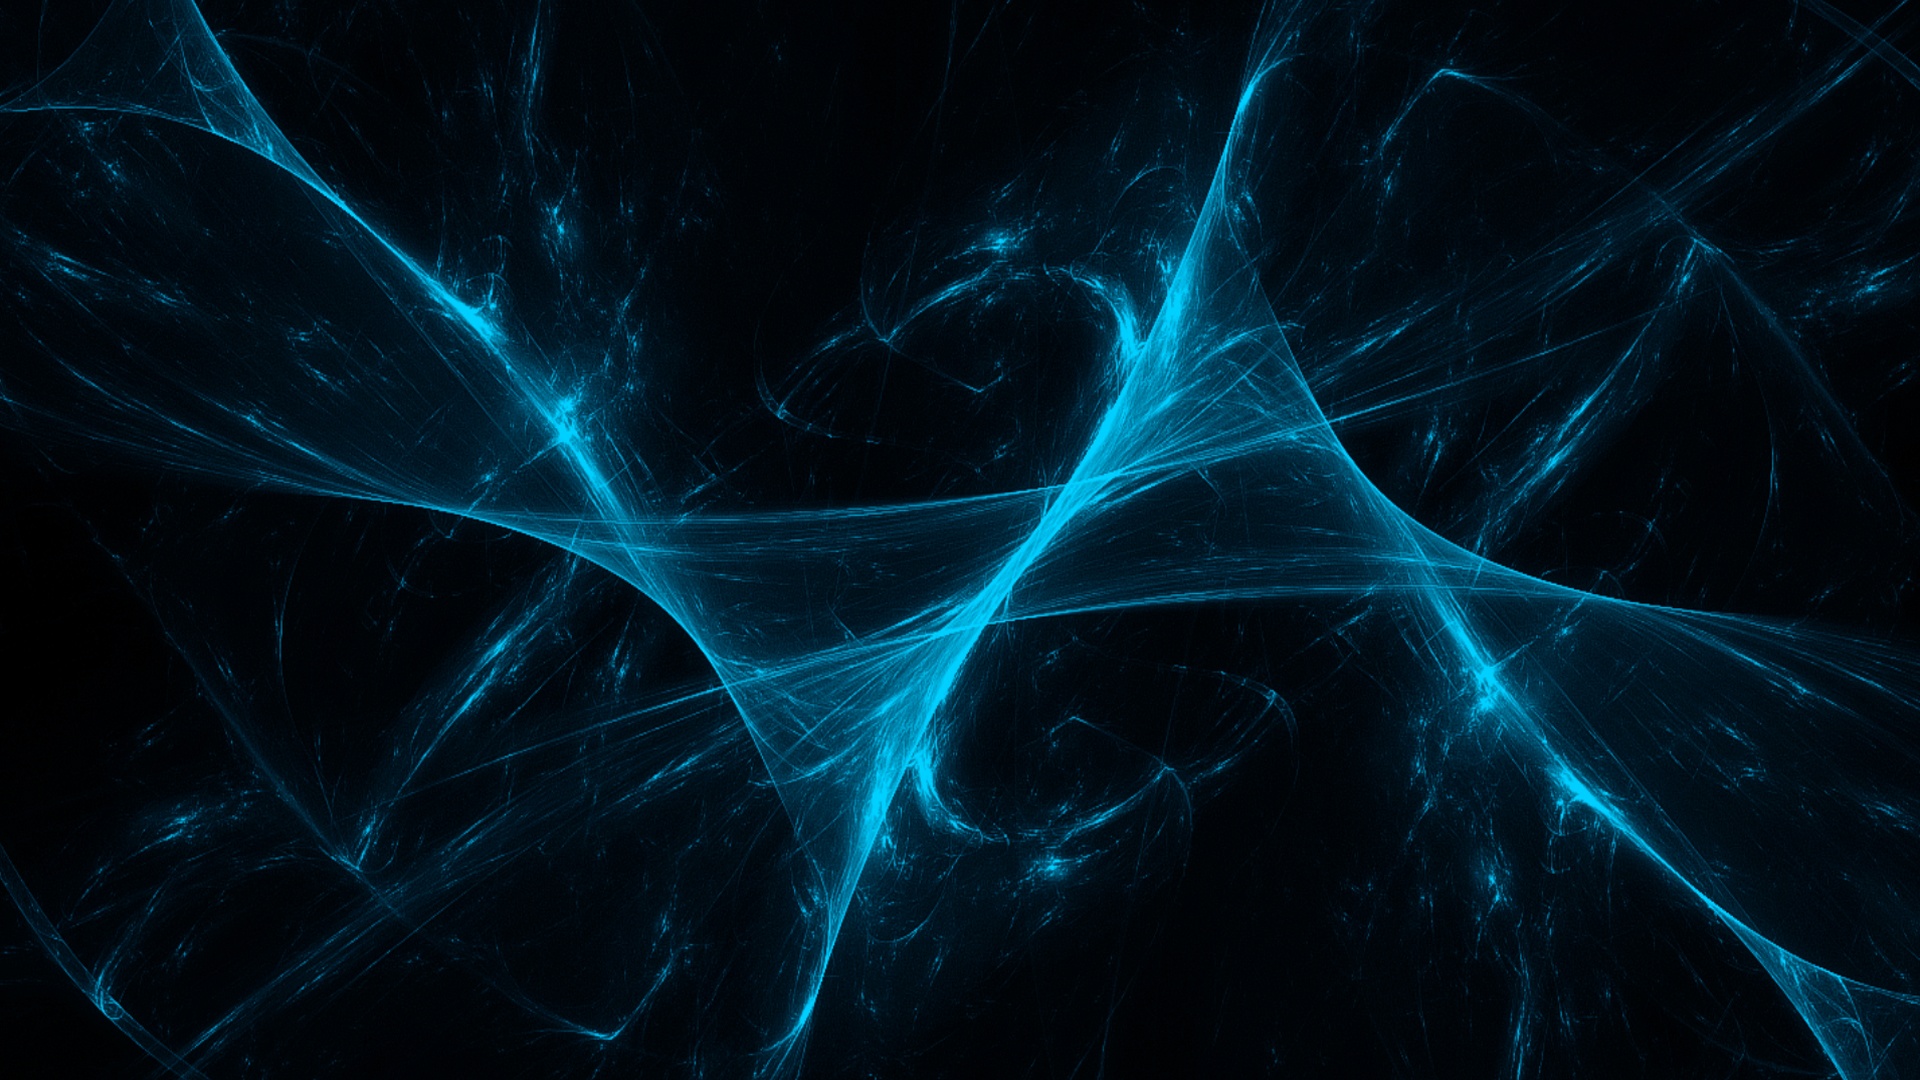 High Res Abstract Backgrounds wallpaper 1920x1080 10648